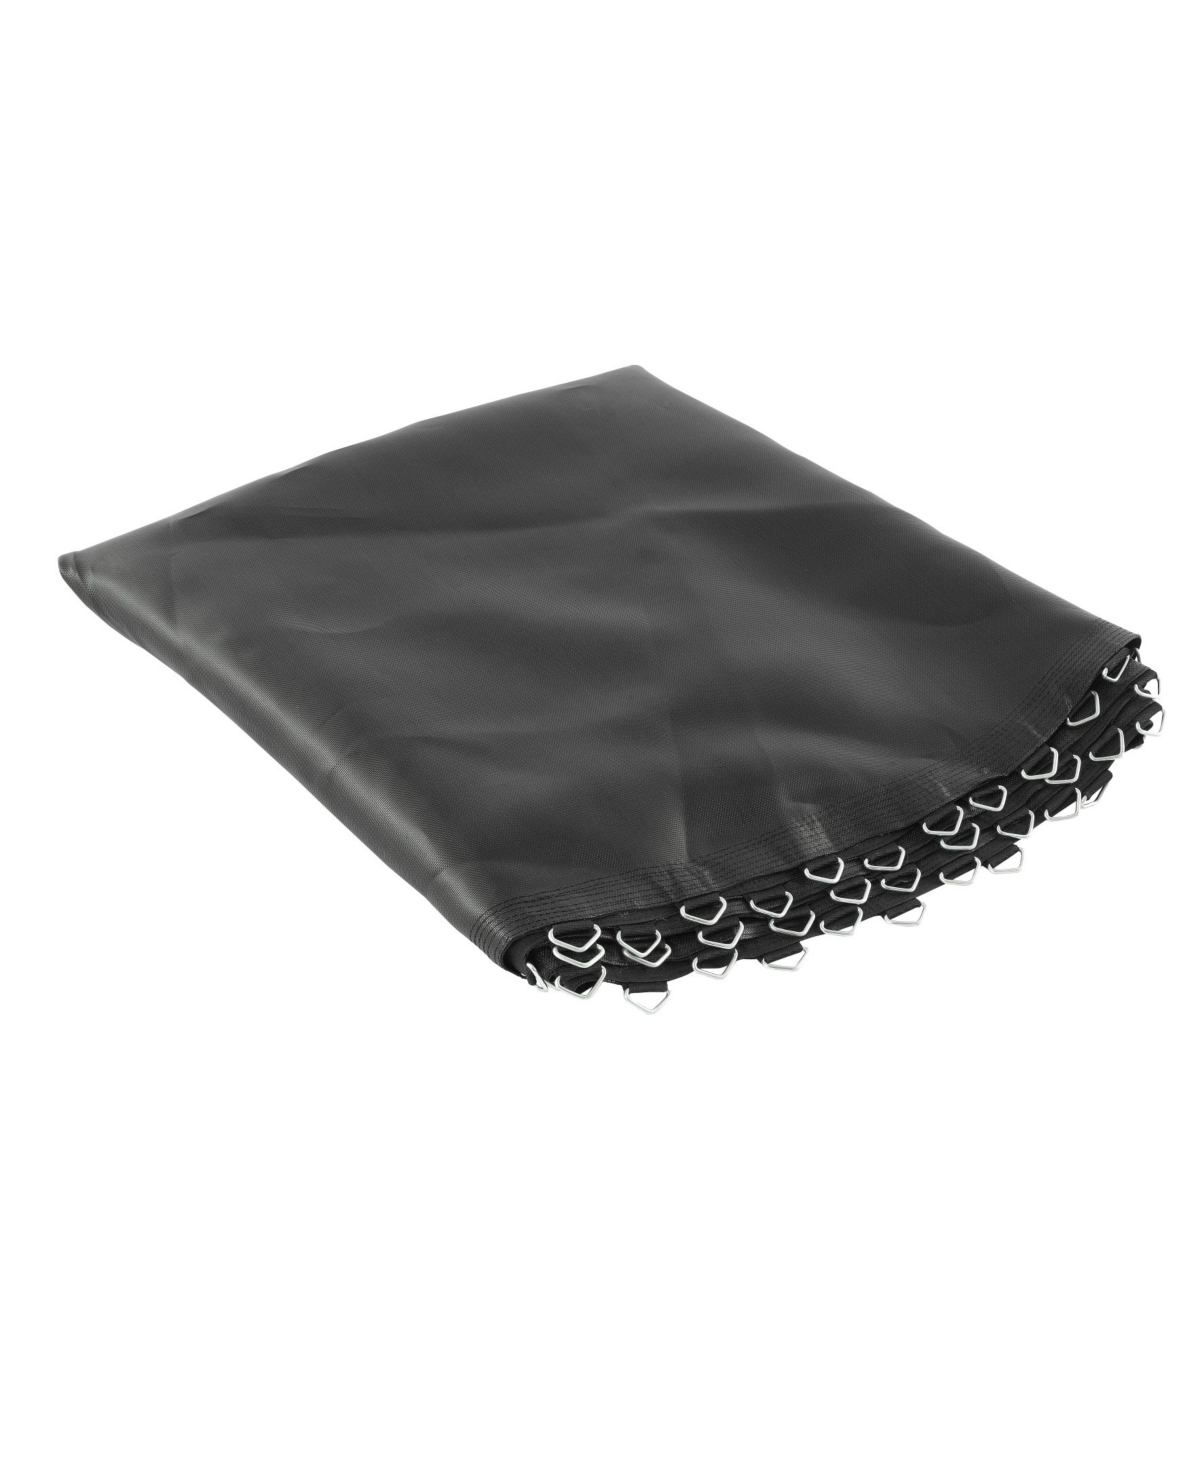 Upperbounce Trampoline Replacement Jumping Mat, Fits For 7.5' Round In Black